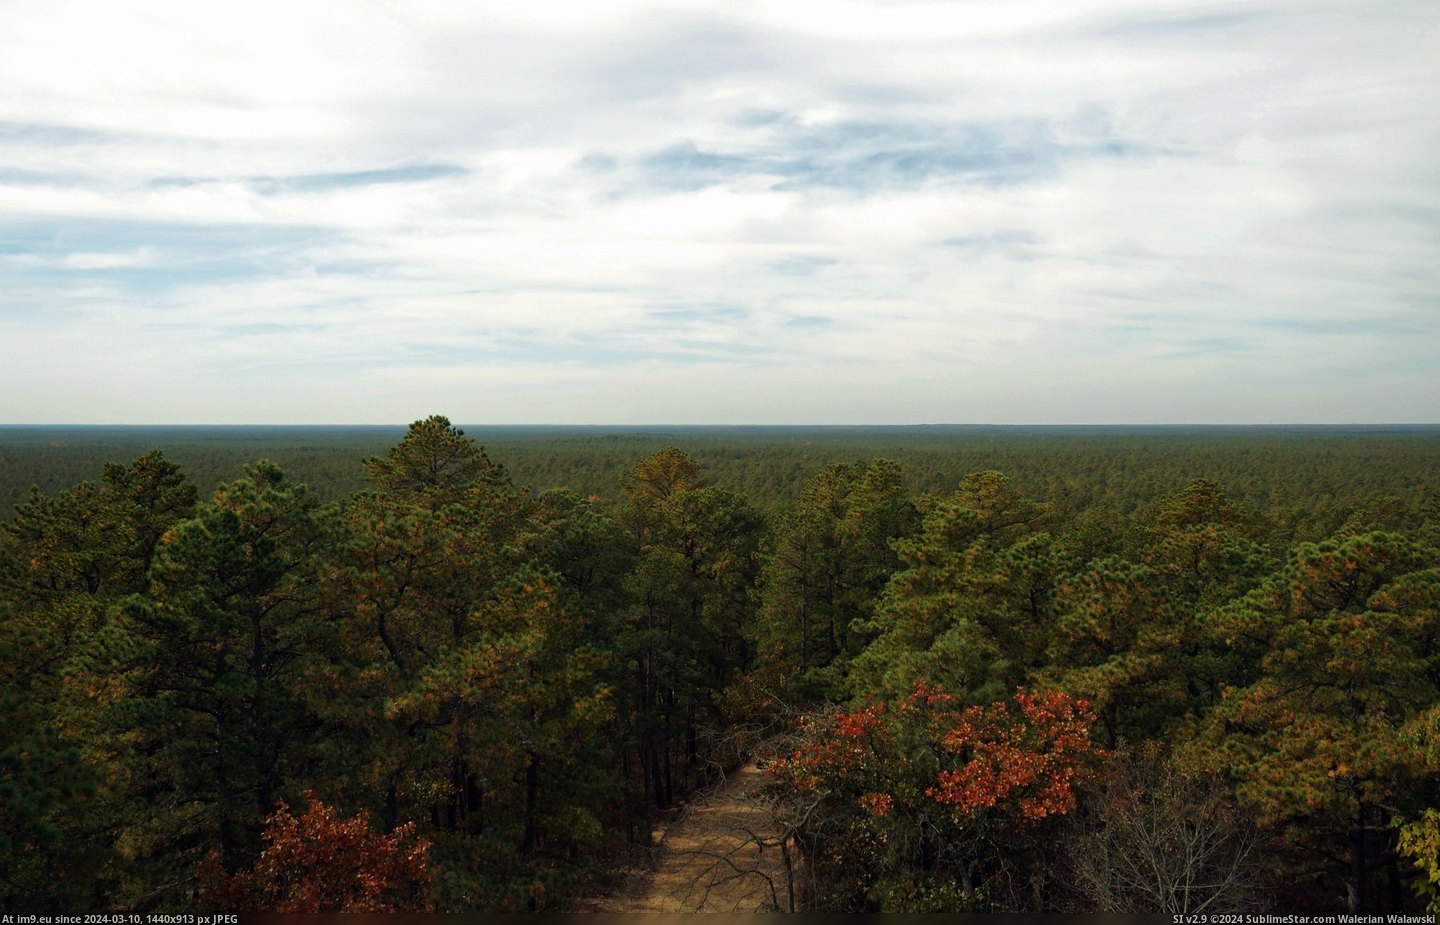 #Fire #Tower #Apple #Pine #Endless #Barrens #Hill #Pie #Jersey [Earthporn] [OC] Endless pine barrens, from the Apple Pie Hill fire tower in New Jersey [2819 x 1800] Pic. (Obraz z album My r/EARTHPORN favs))